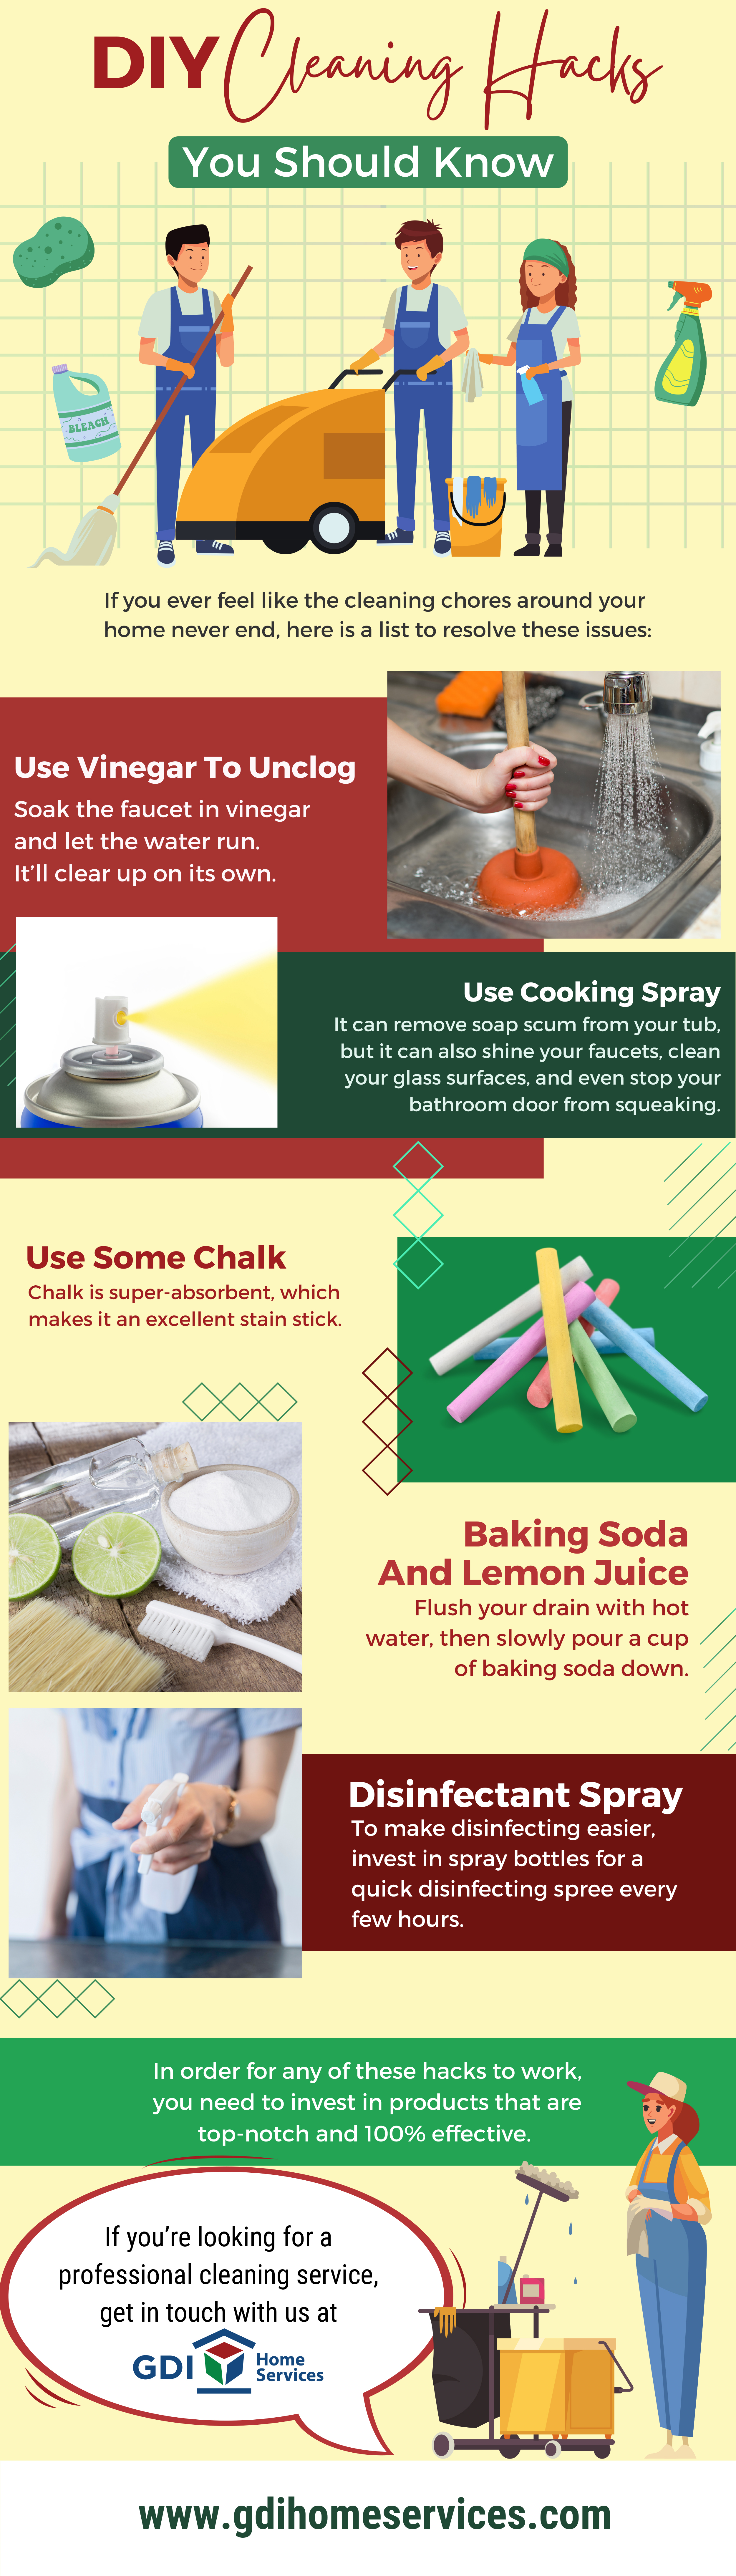 DIY Cleaning Hacks You Should Know - Infograph